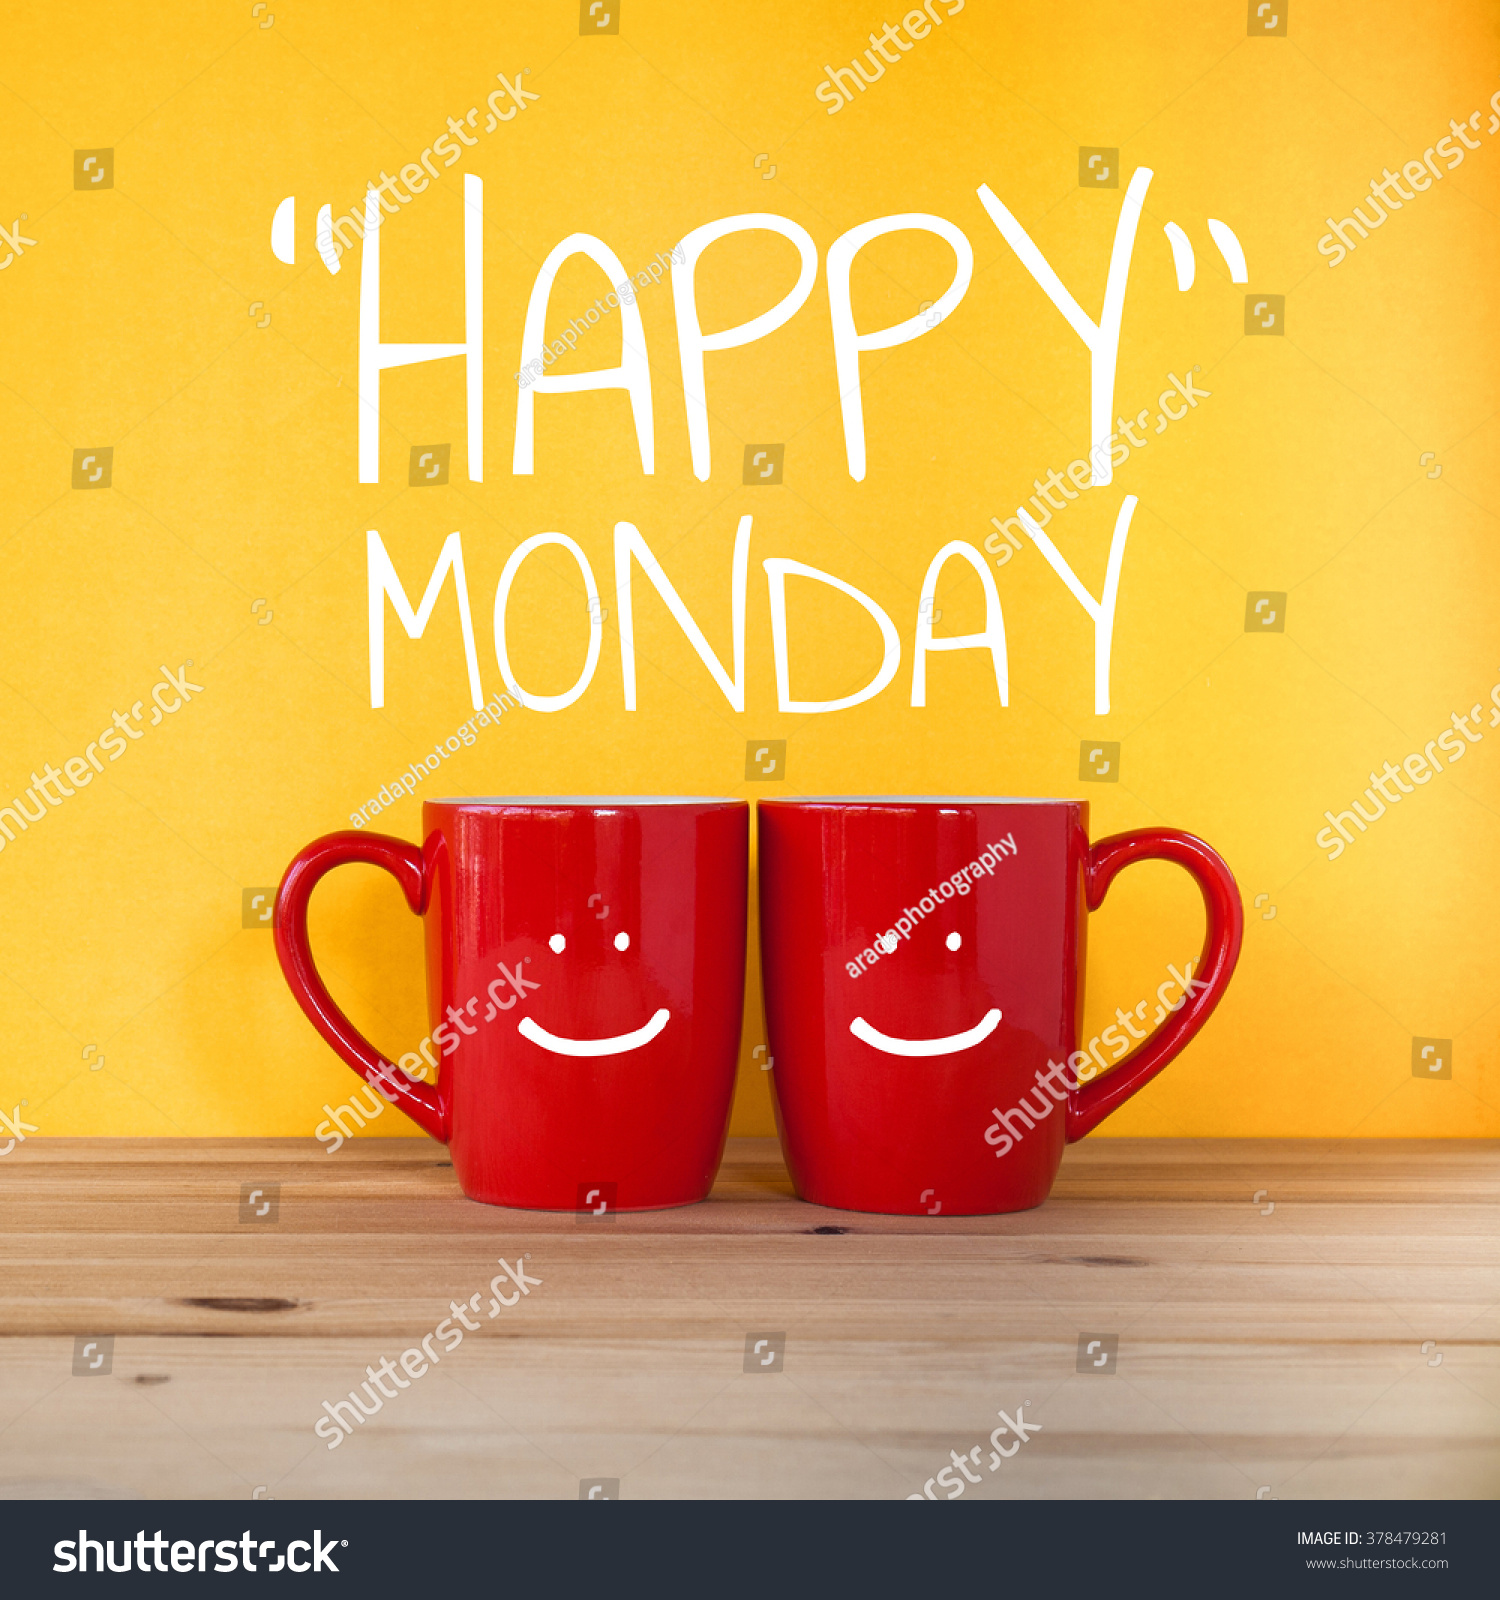 https://image.shutterstock.com/z/stock-photo-happy-monday-word-two-cups-of-coffee-and-stand-together-to-be-heart-shape-on-yellow-background-378479281.jpg